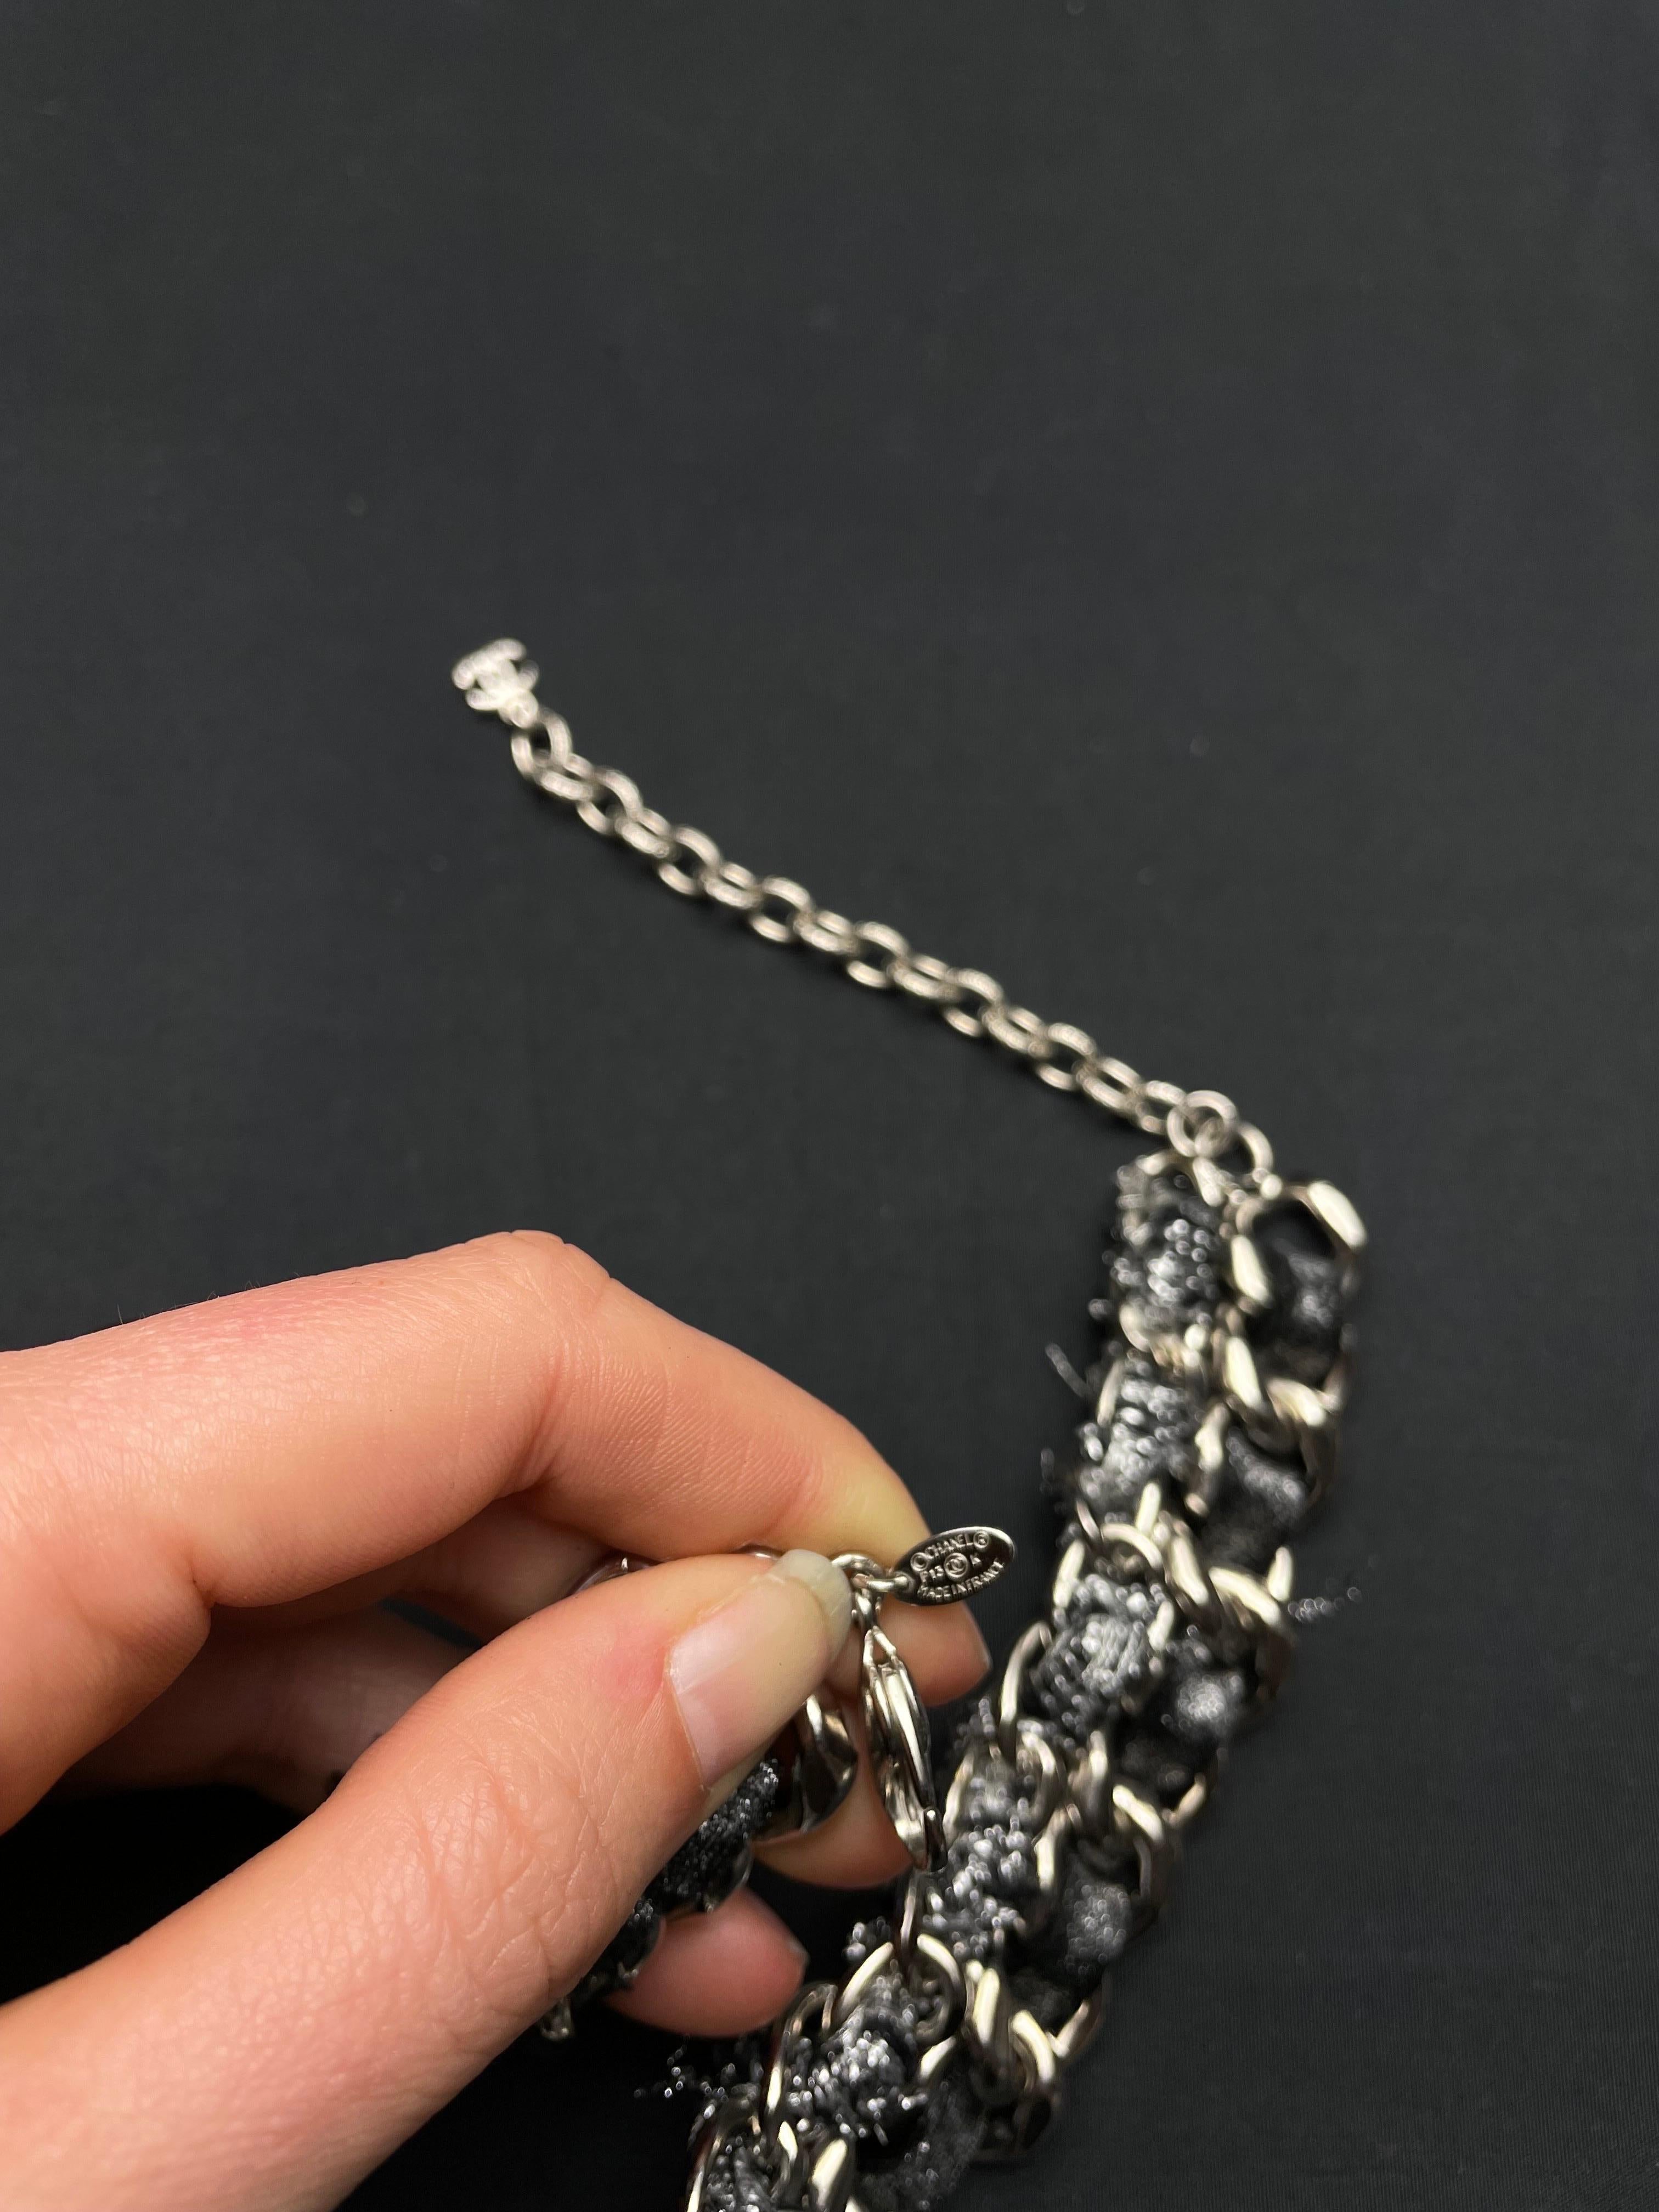 Chanel necklace from the Fall 2018 collection in silver metal with tweed and paint inserts. Conditions equal to new. Total length 30 cm, pendant length 20 cm and width 6 cm. Maximum closure diameter 13 cm, adjustable.